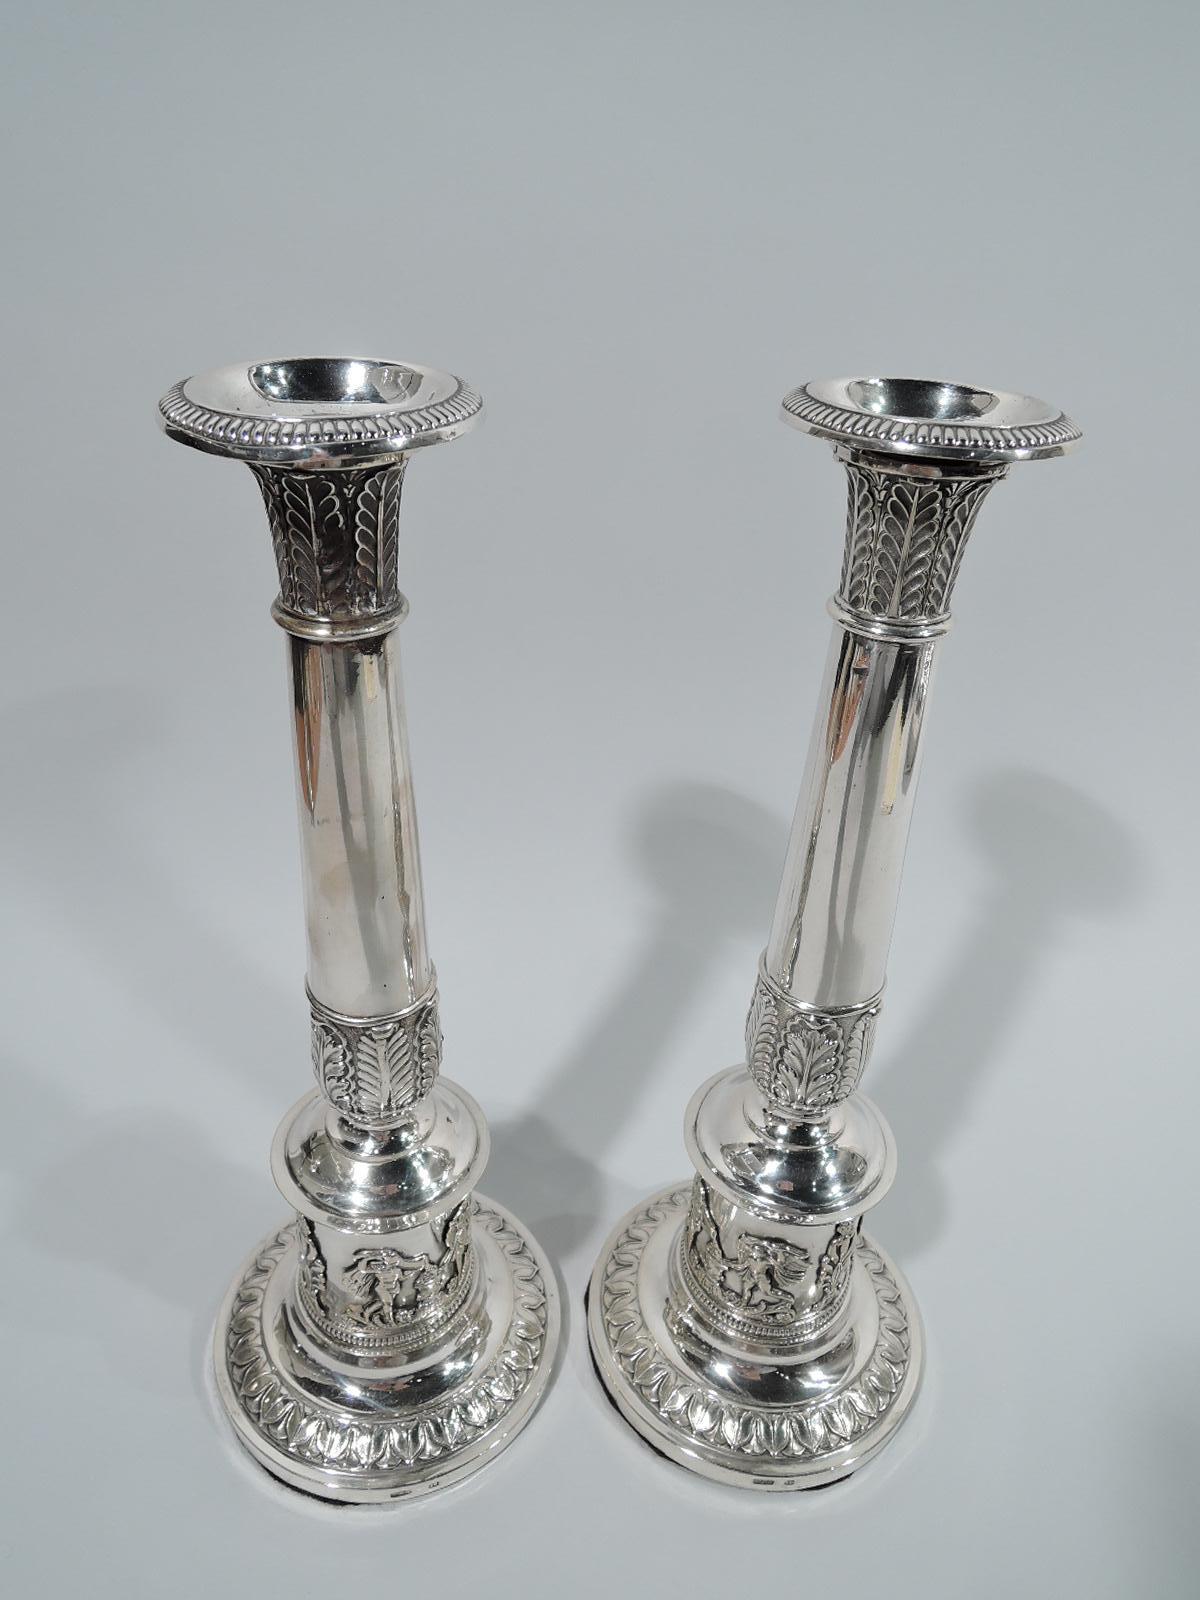 Pair of German Biedermeier classical silver candlesticks, circa 1820. Each: Upward tapering shaft on columnar base on raised foot. Classical ornamental borders with gadrooning, leaf-and-dart, and leaf. On base is applied frieze depicting golden